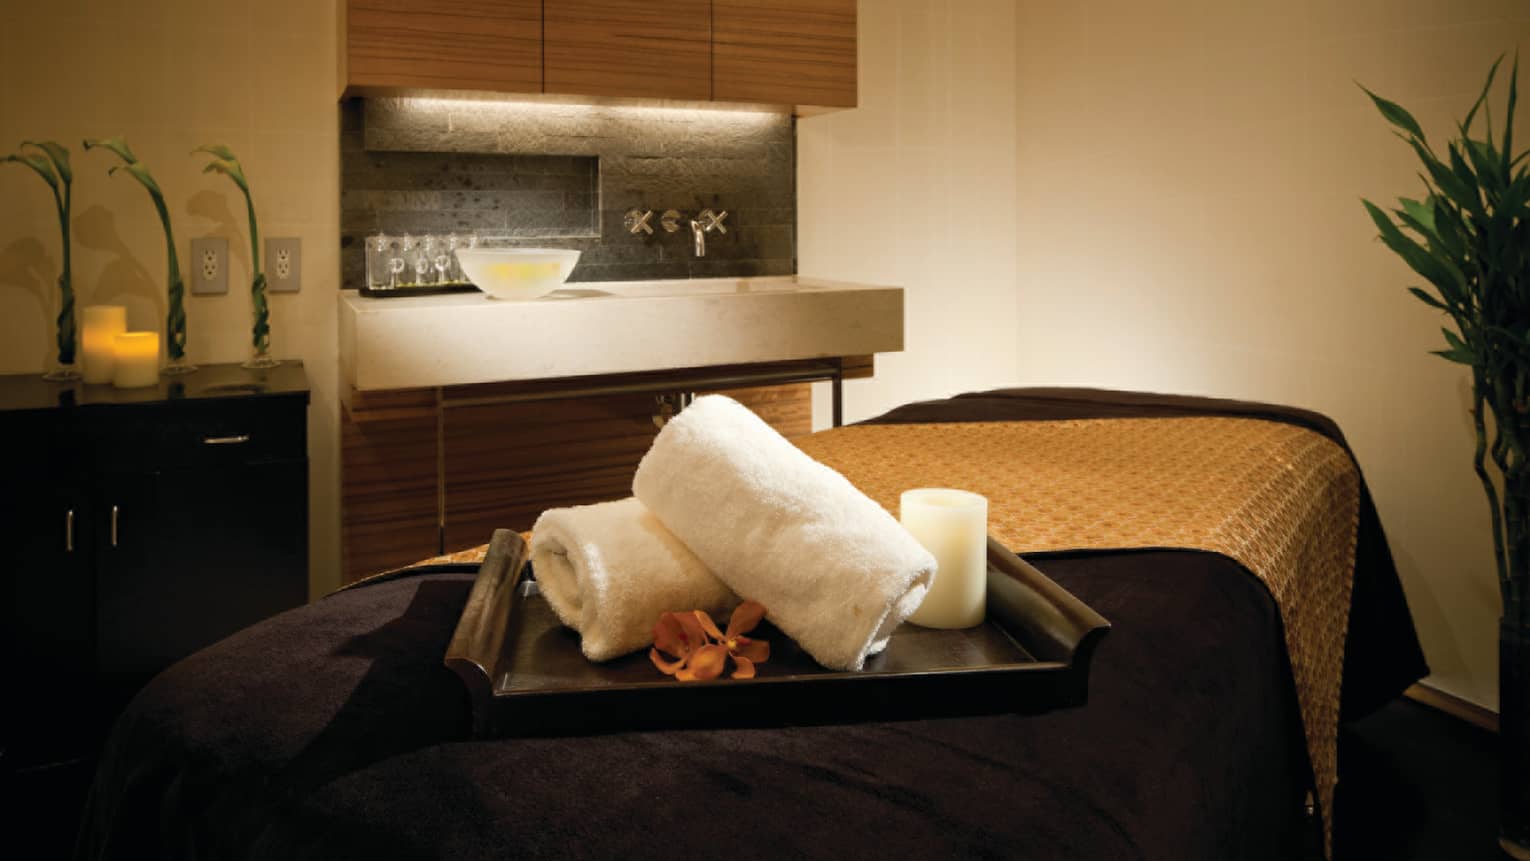 Spa treatment room, bamboo tray with towels, candles, flower on massage bed